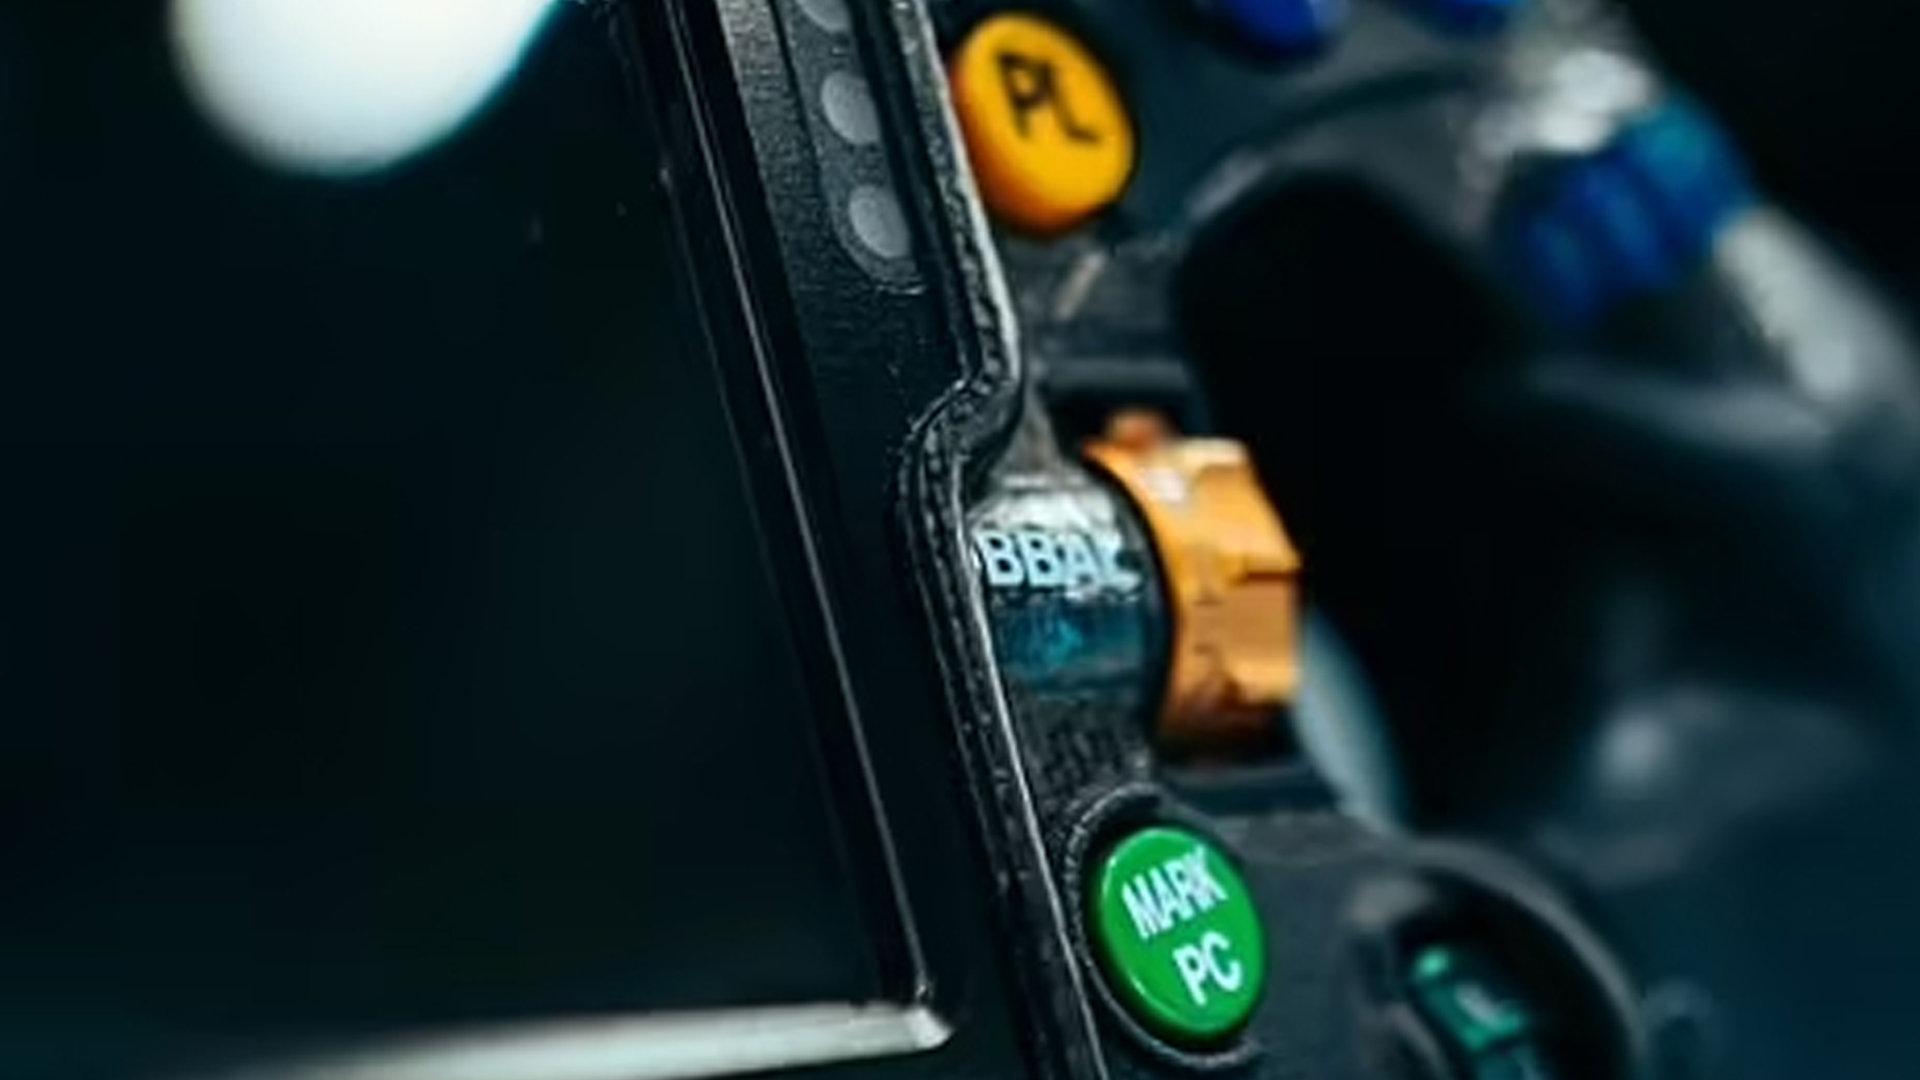 Mercedes unveil never-before-seen car feature for Lewis Hamilton as F1 fans ask ‘is this real?’ [Video]